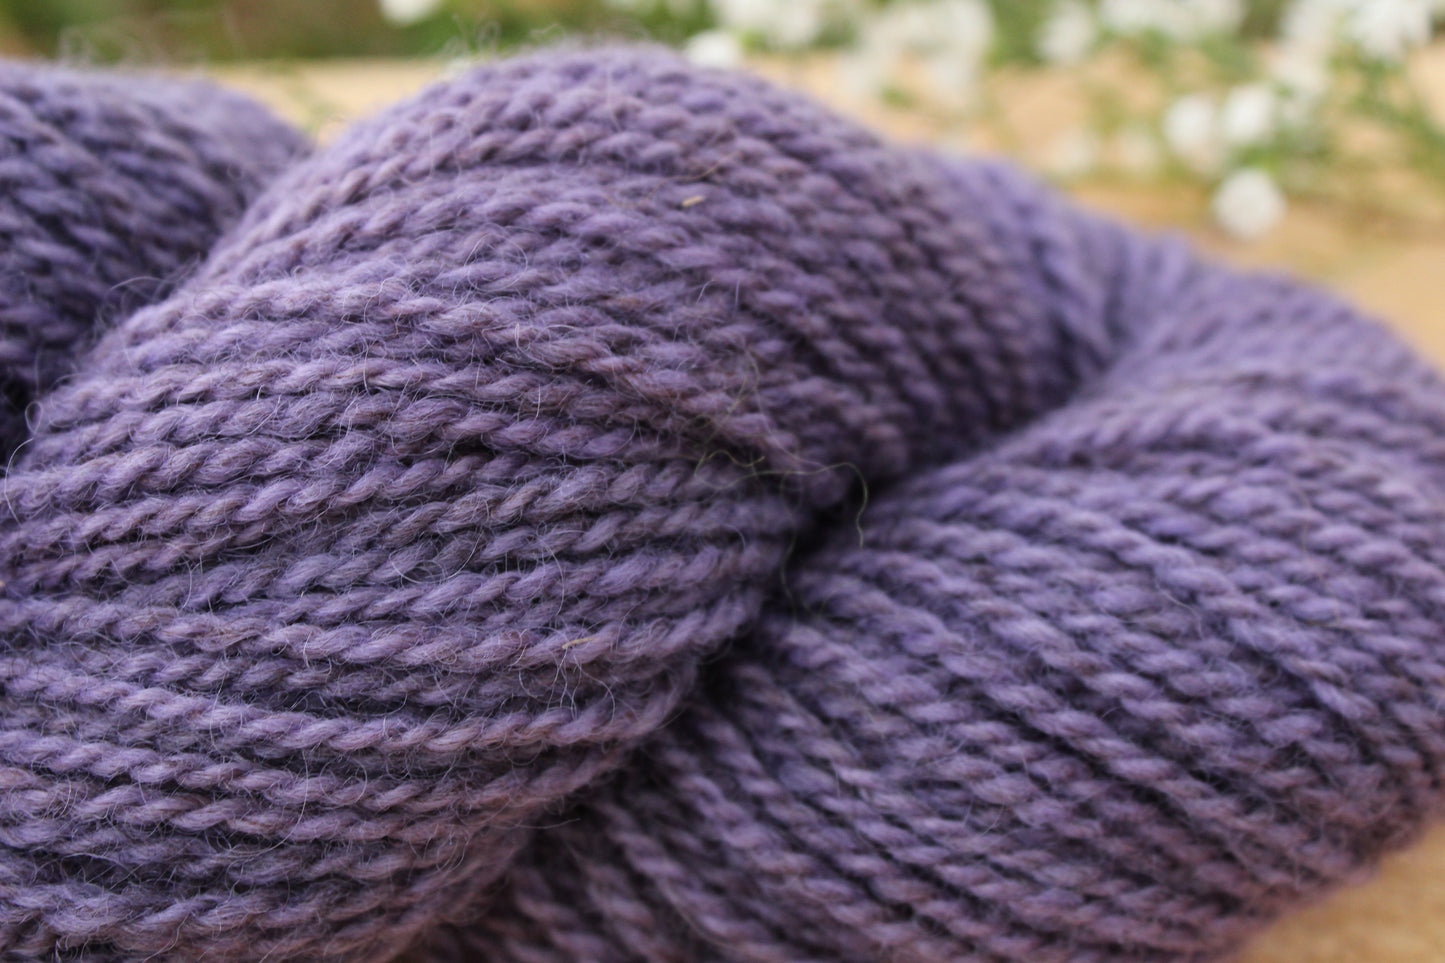 DK weight Hand-dyed Longwool Blend - 2 ply - WISTERIA